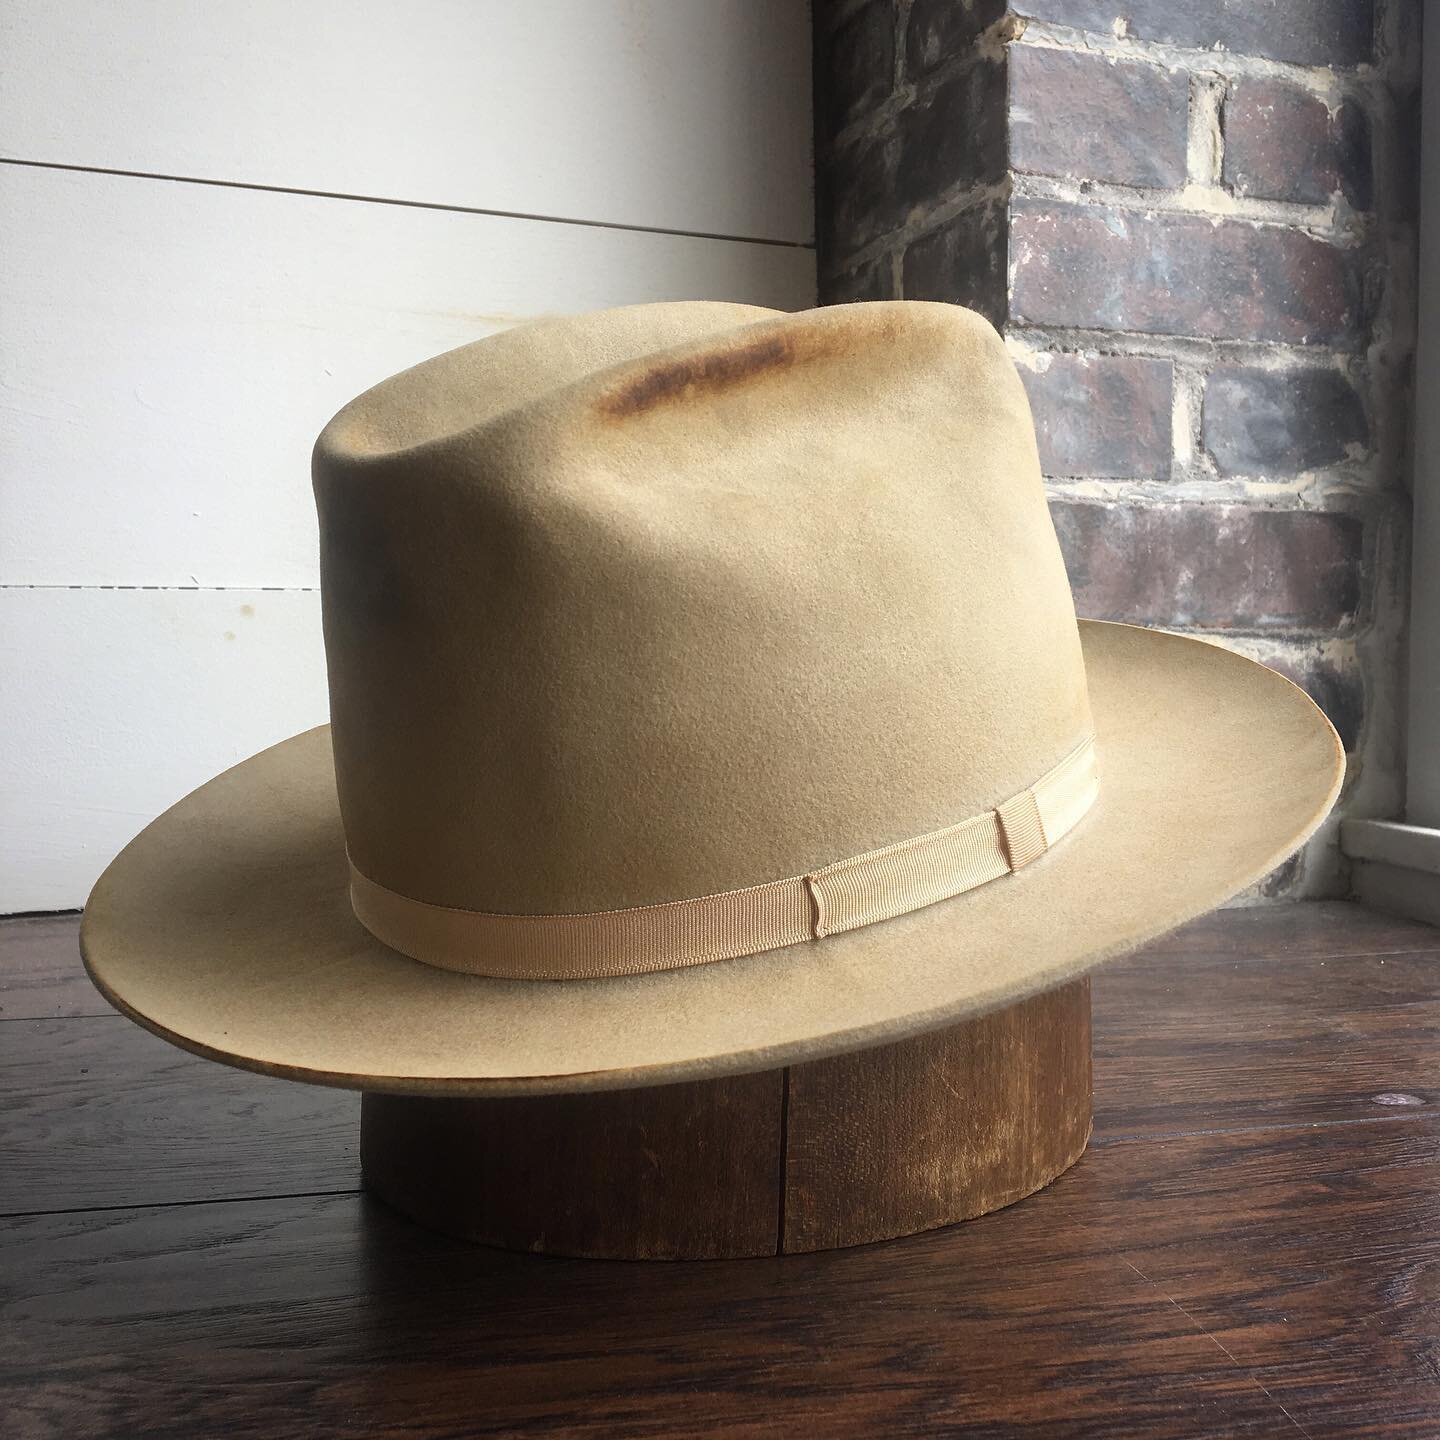  Sand, dress weight, pure beaver.  Heavily distressed to replicate years of wear from somebody taking on and off their hat.   Medium cattleman’s crown.  2 3/4” flanged brim.  Bone trim. 